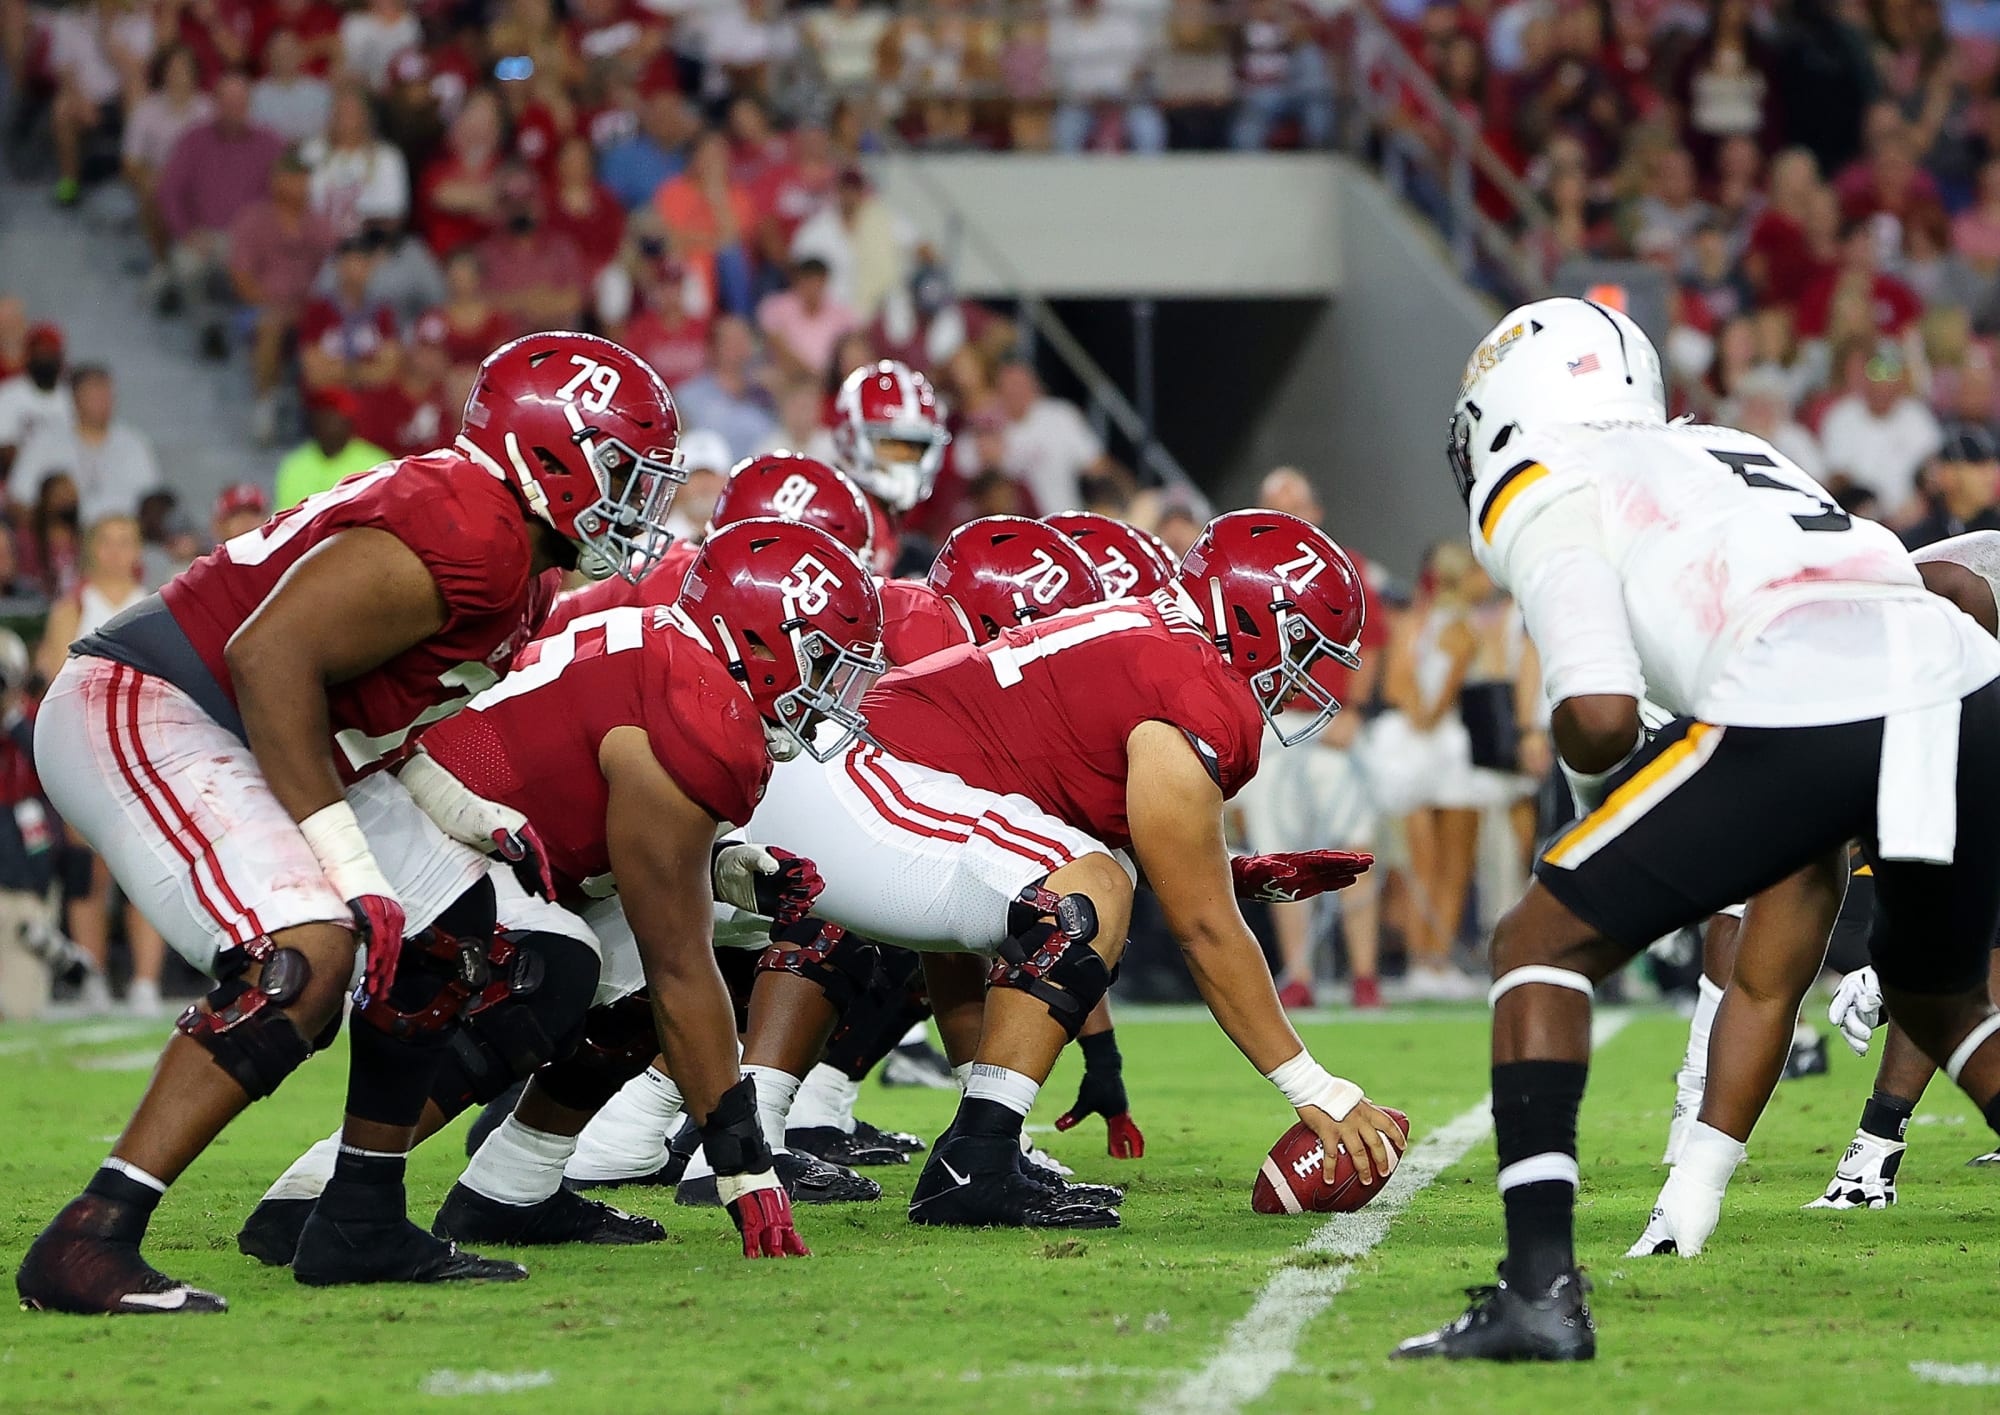 Alabama Football: After Miles McVay, how many more OL commits?